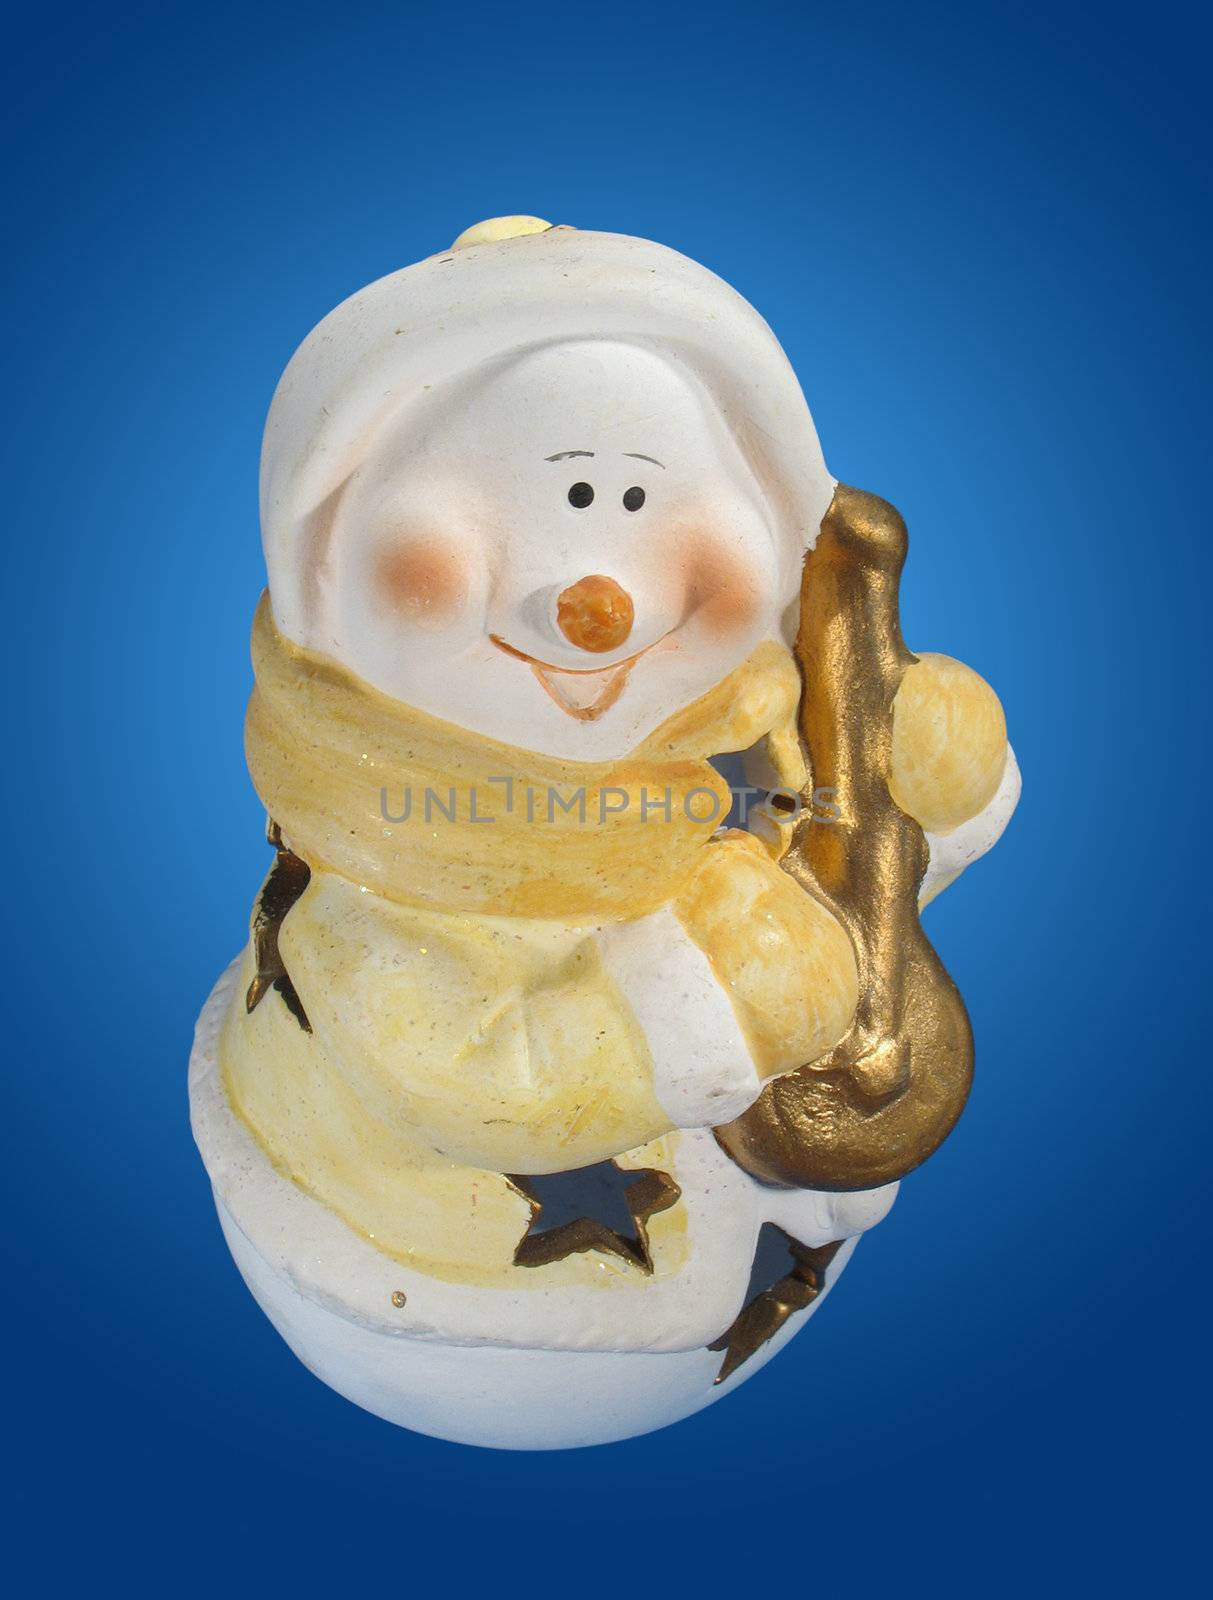 Beautiful snowman on the blue backgrund. With clipping paths.